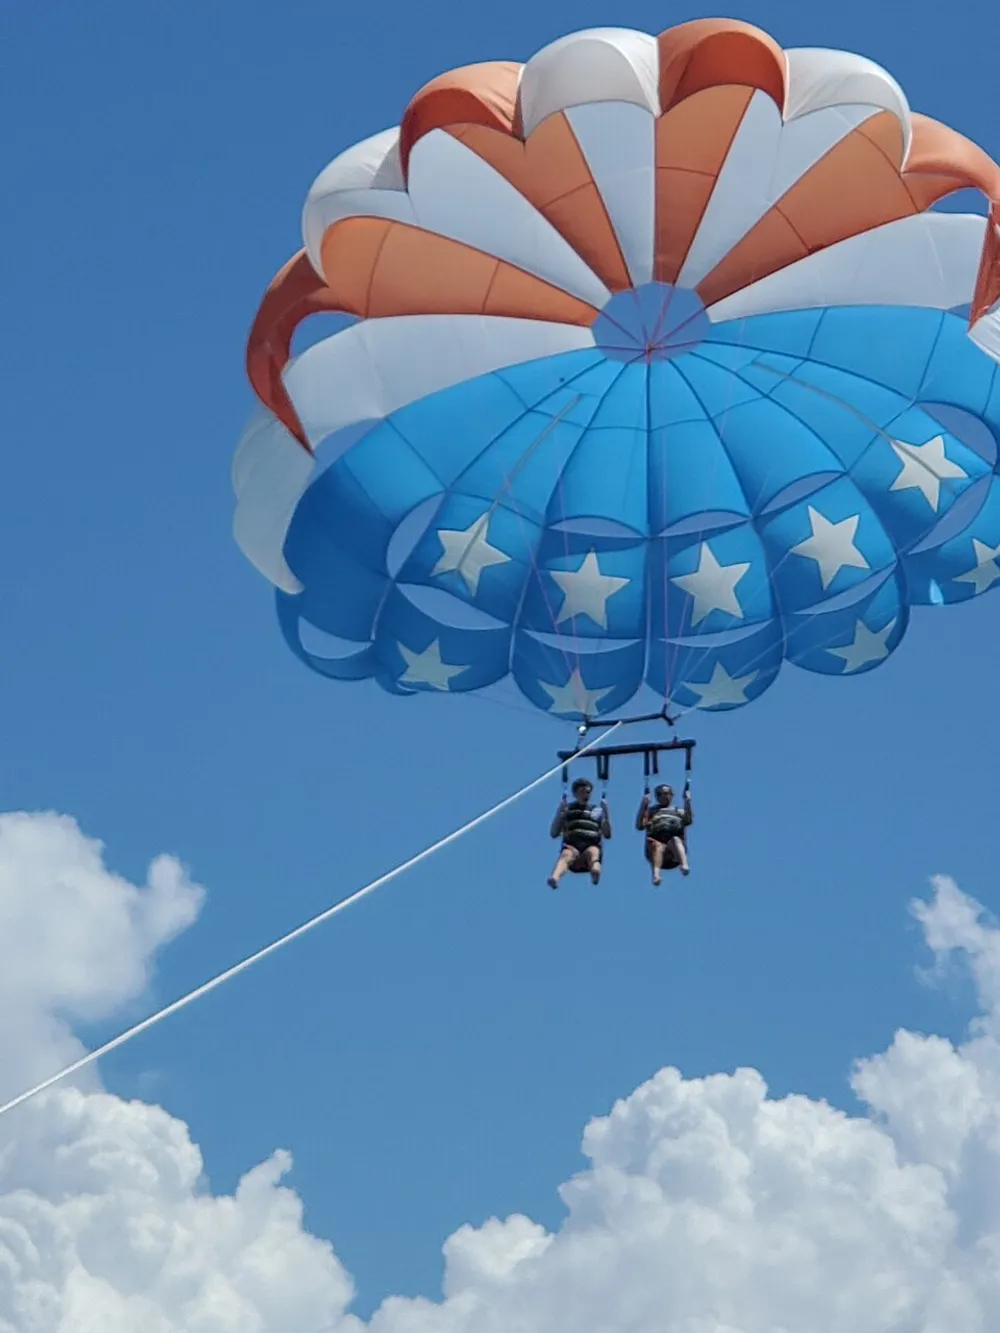 Two individuals are parasailing with a parachute adorned with stars and striped patterns high above the clouds against a clear blue sky